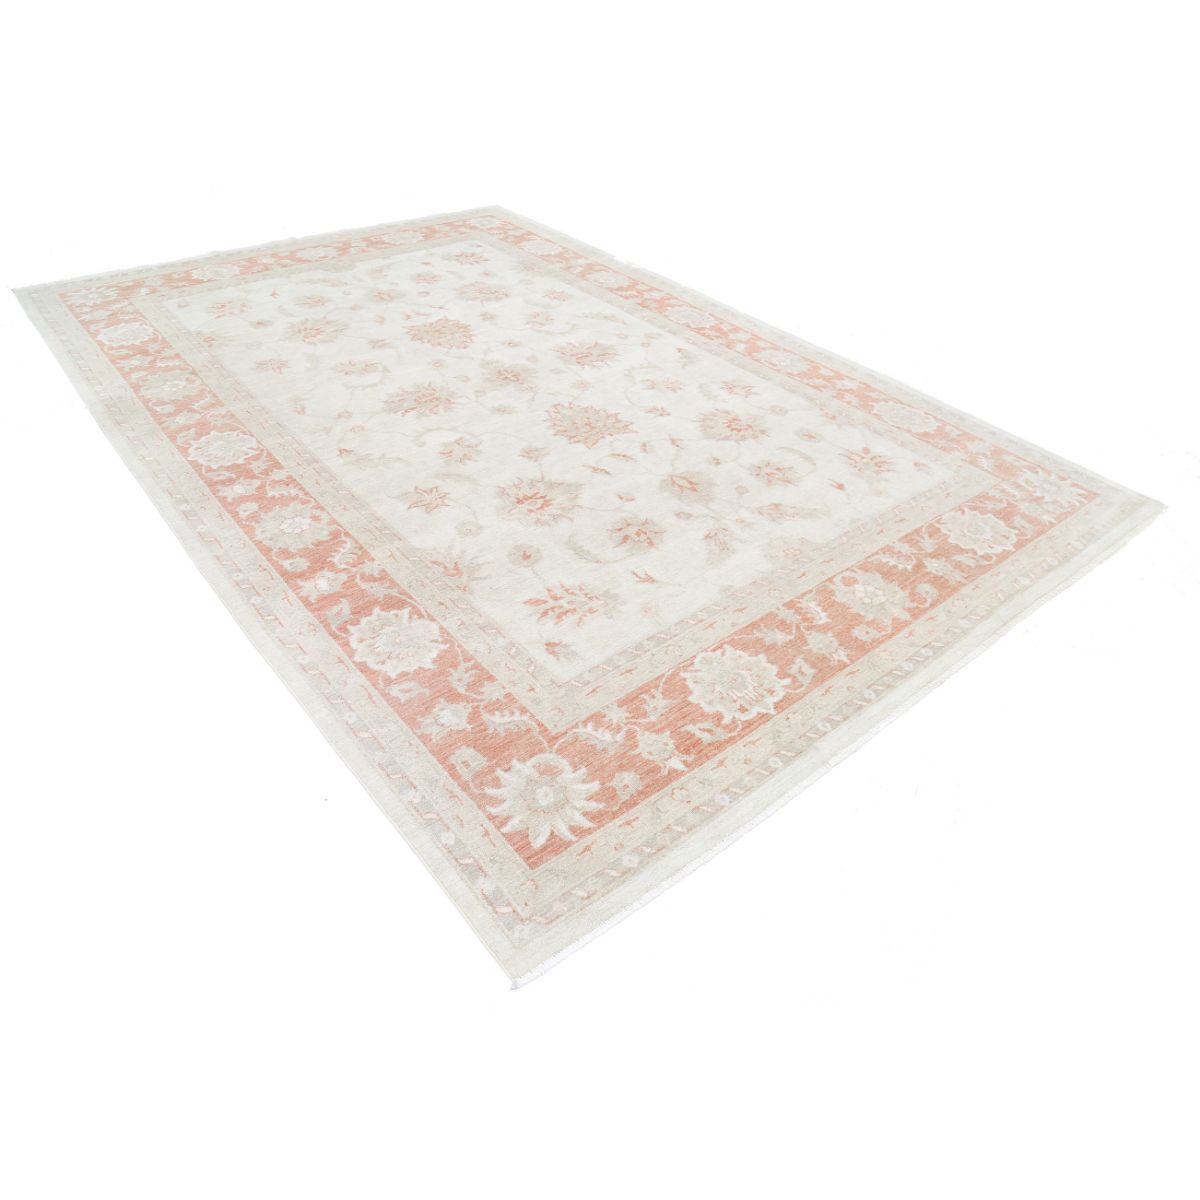 Serenity 8'0" X 11'9" Wool Hand-Knotted Rug